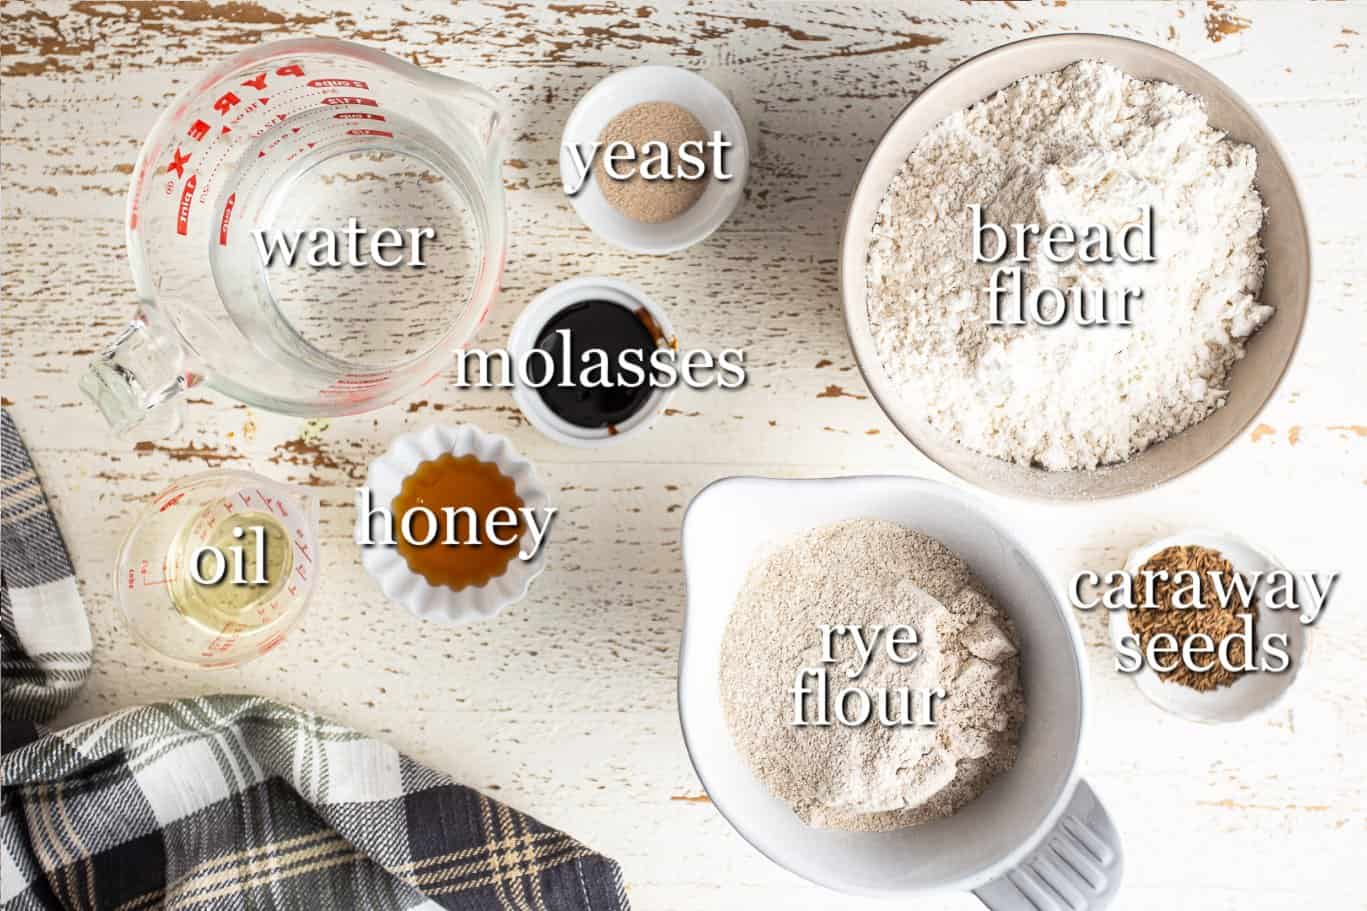 Ingredients for making rye bread, with text labels.